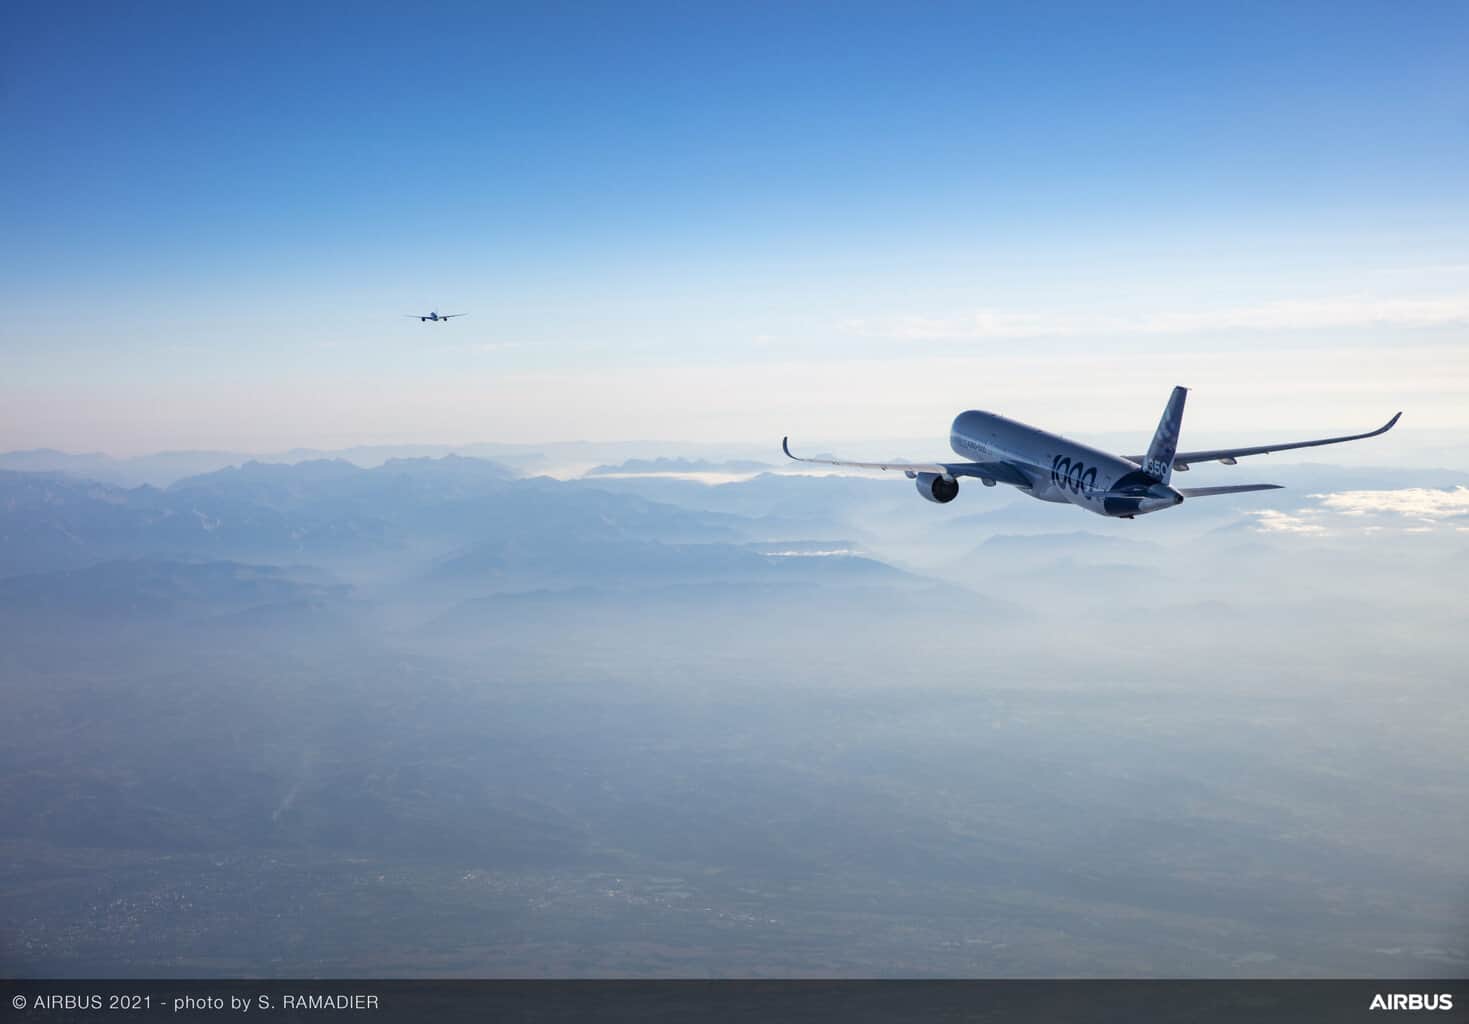 Airbus pioneers sustainable aviation for an open and environmentally friendly world